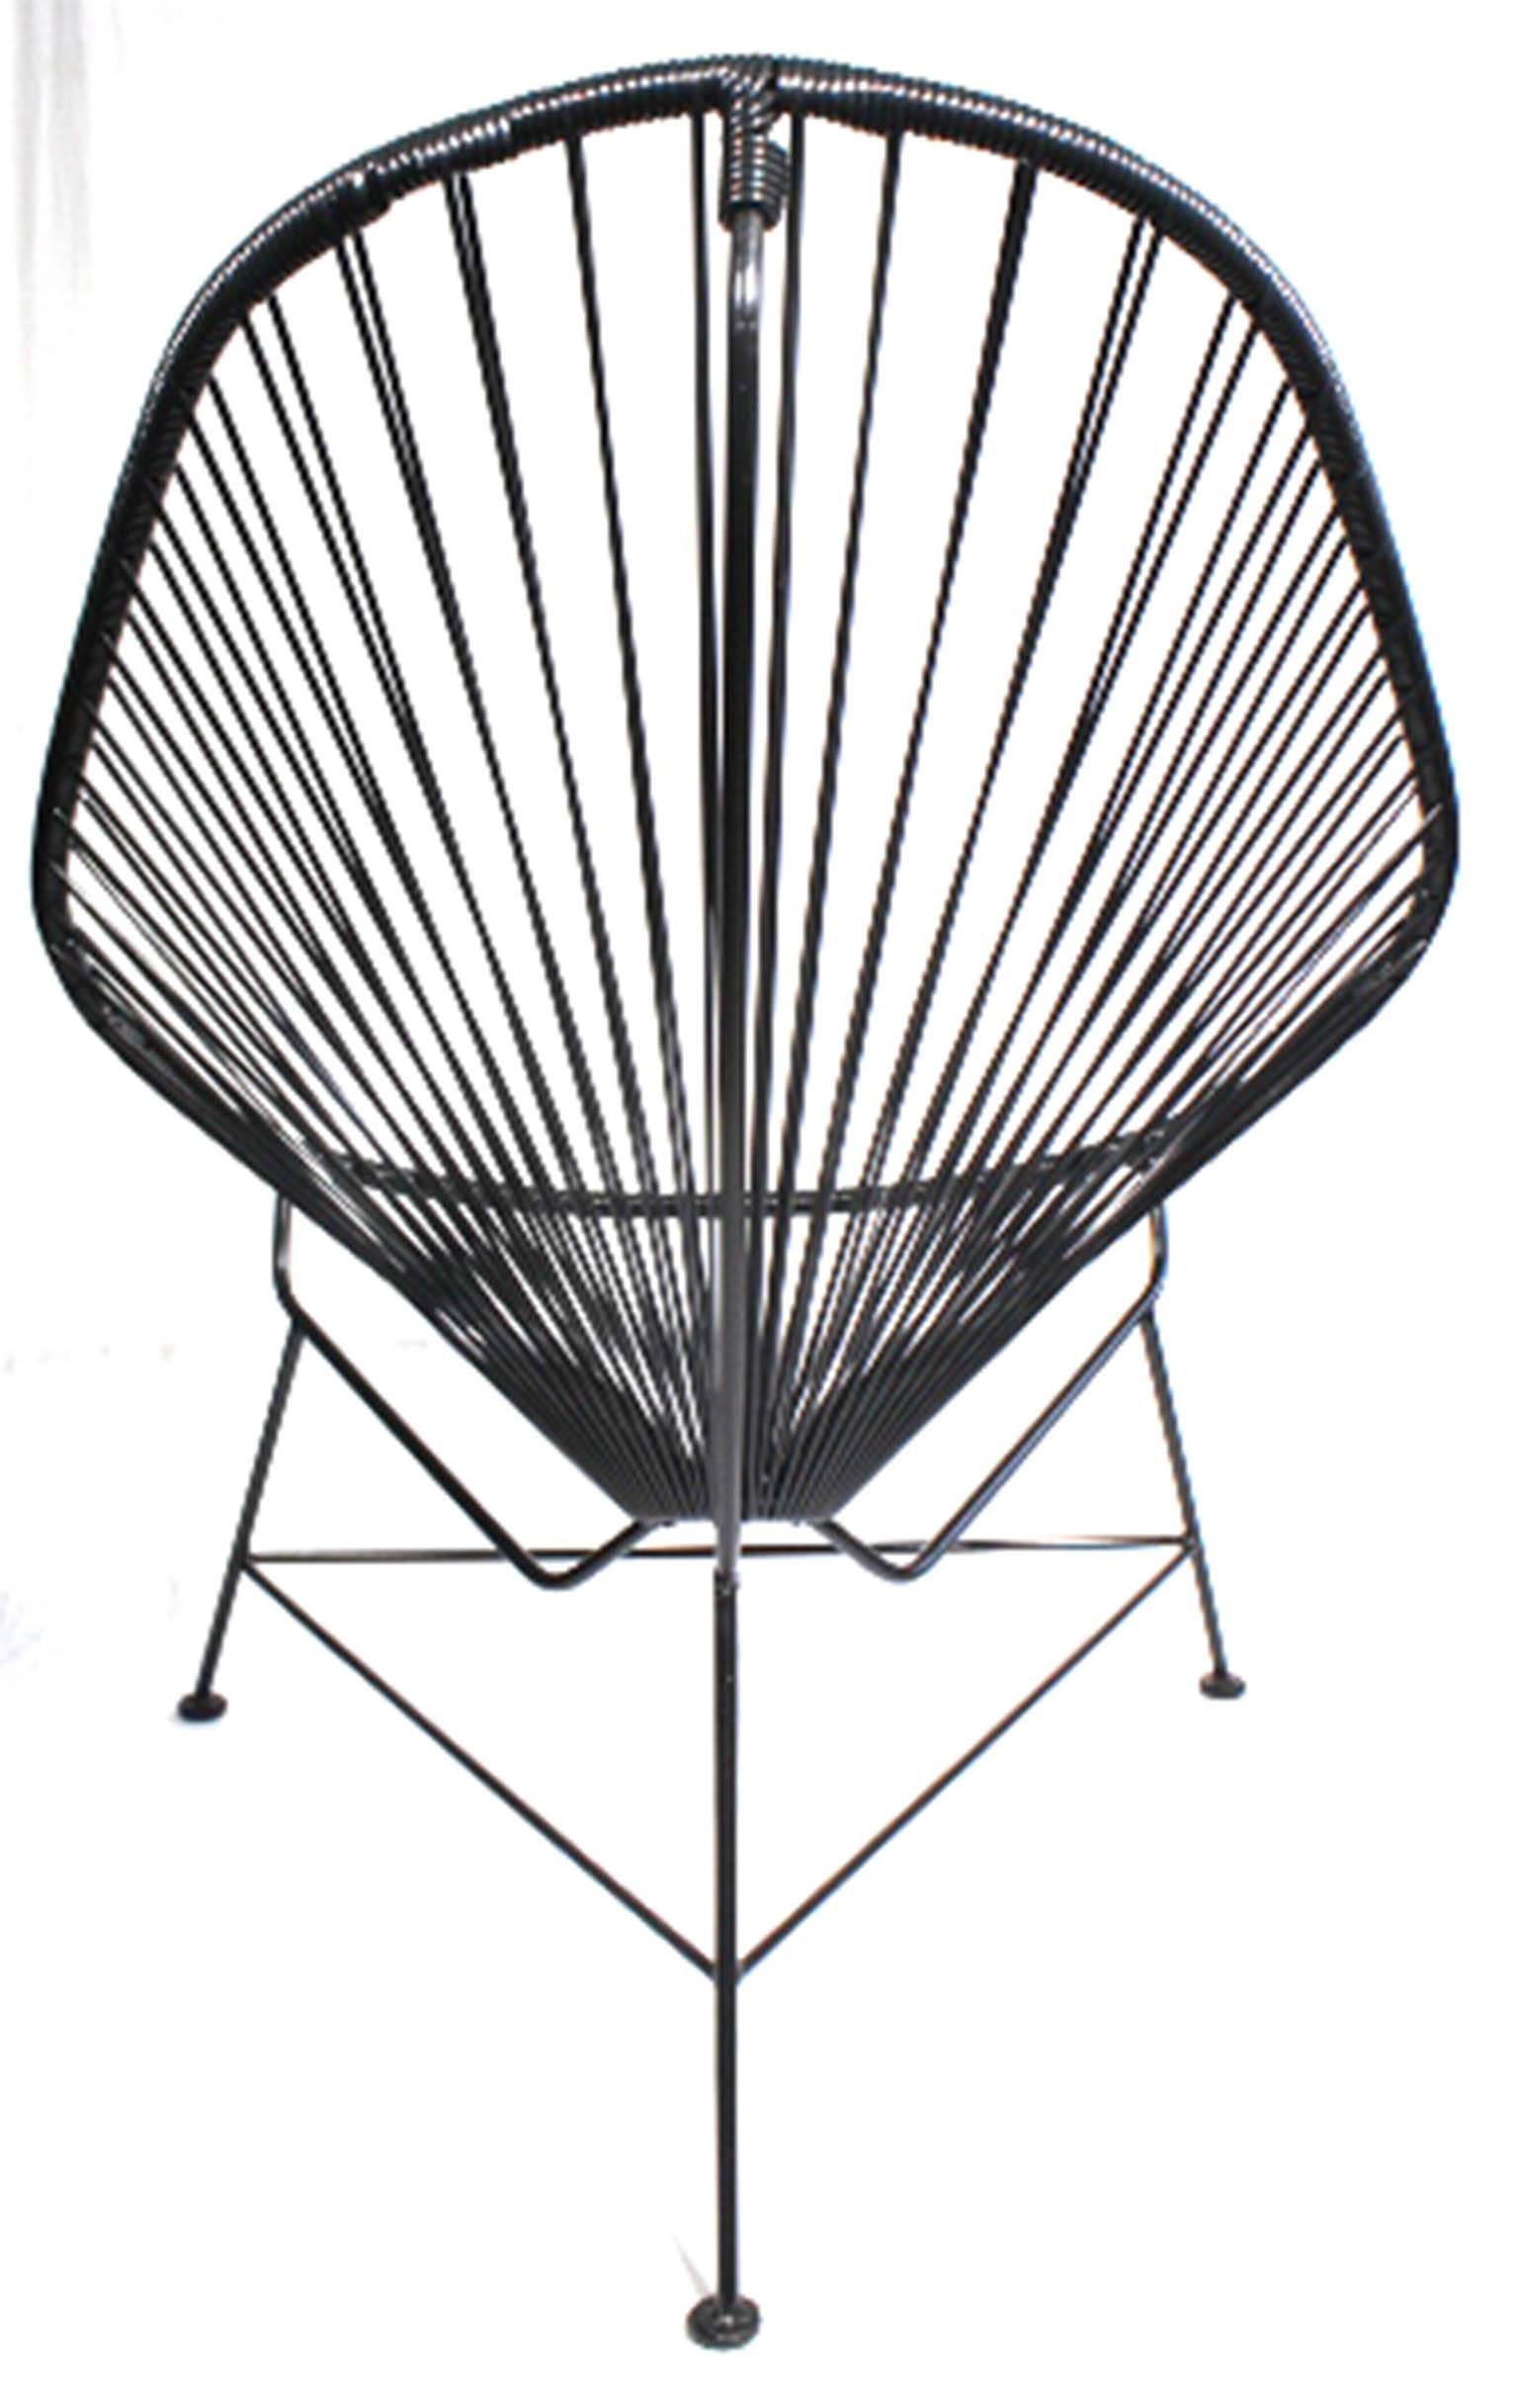 Handmade Acapulco steel frame chair made by a furniture maker in San Francisco.

 Galvanized steel chair.
 Tripod base.
 Features a pear shaped frame.
 Black woven vinyl cord seat.
 

Material: Steel and vinyl.